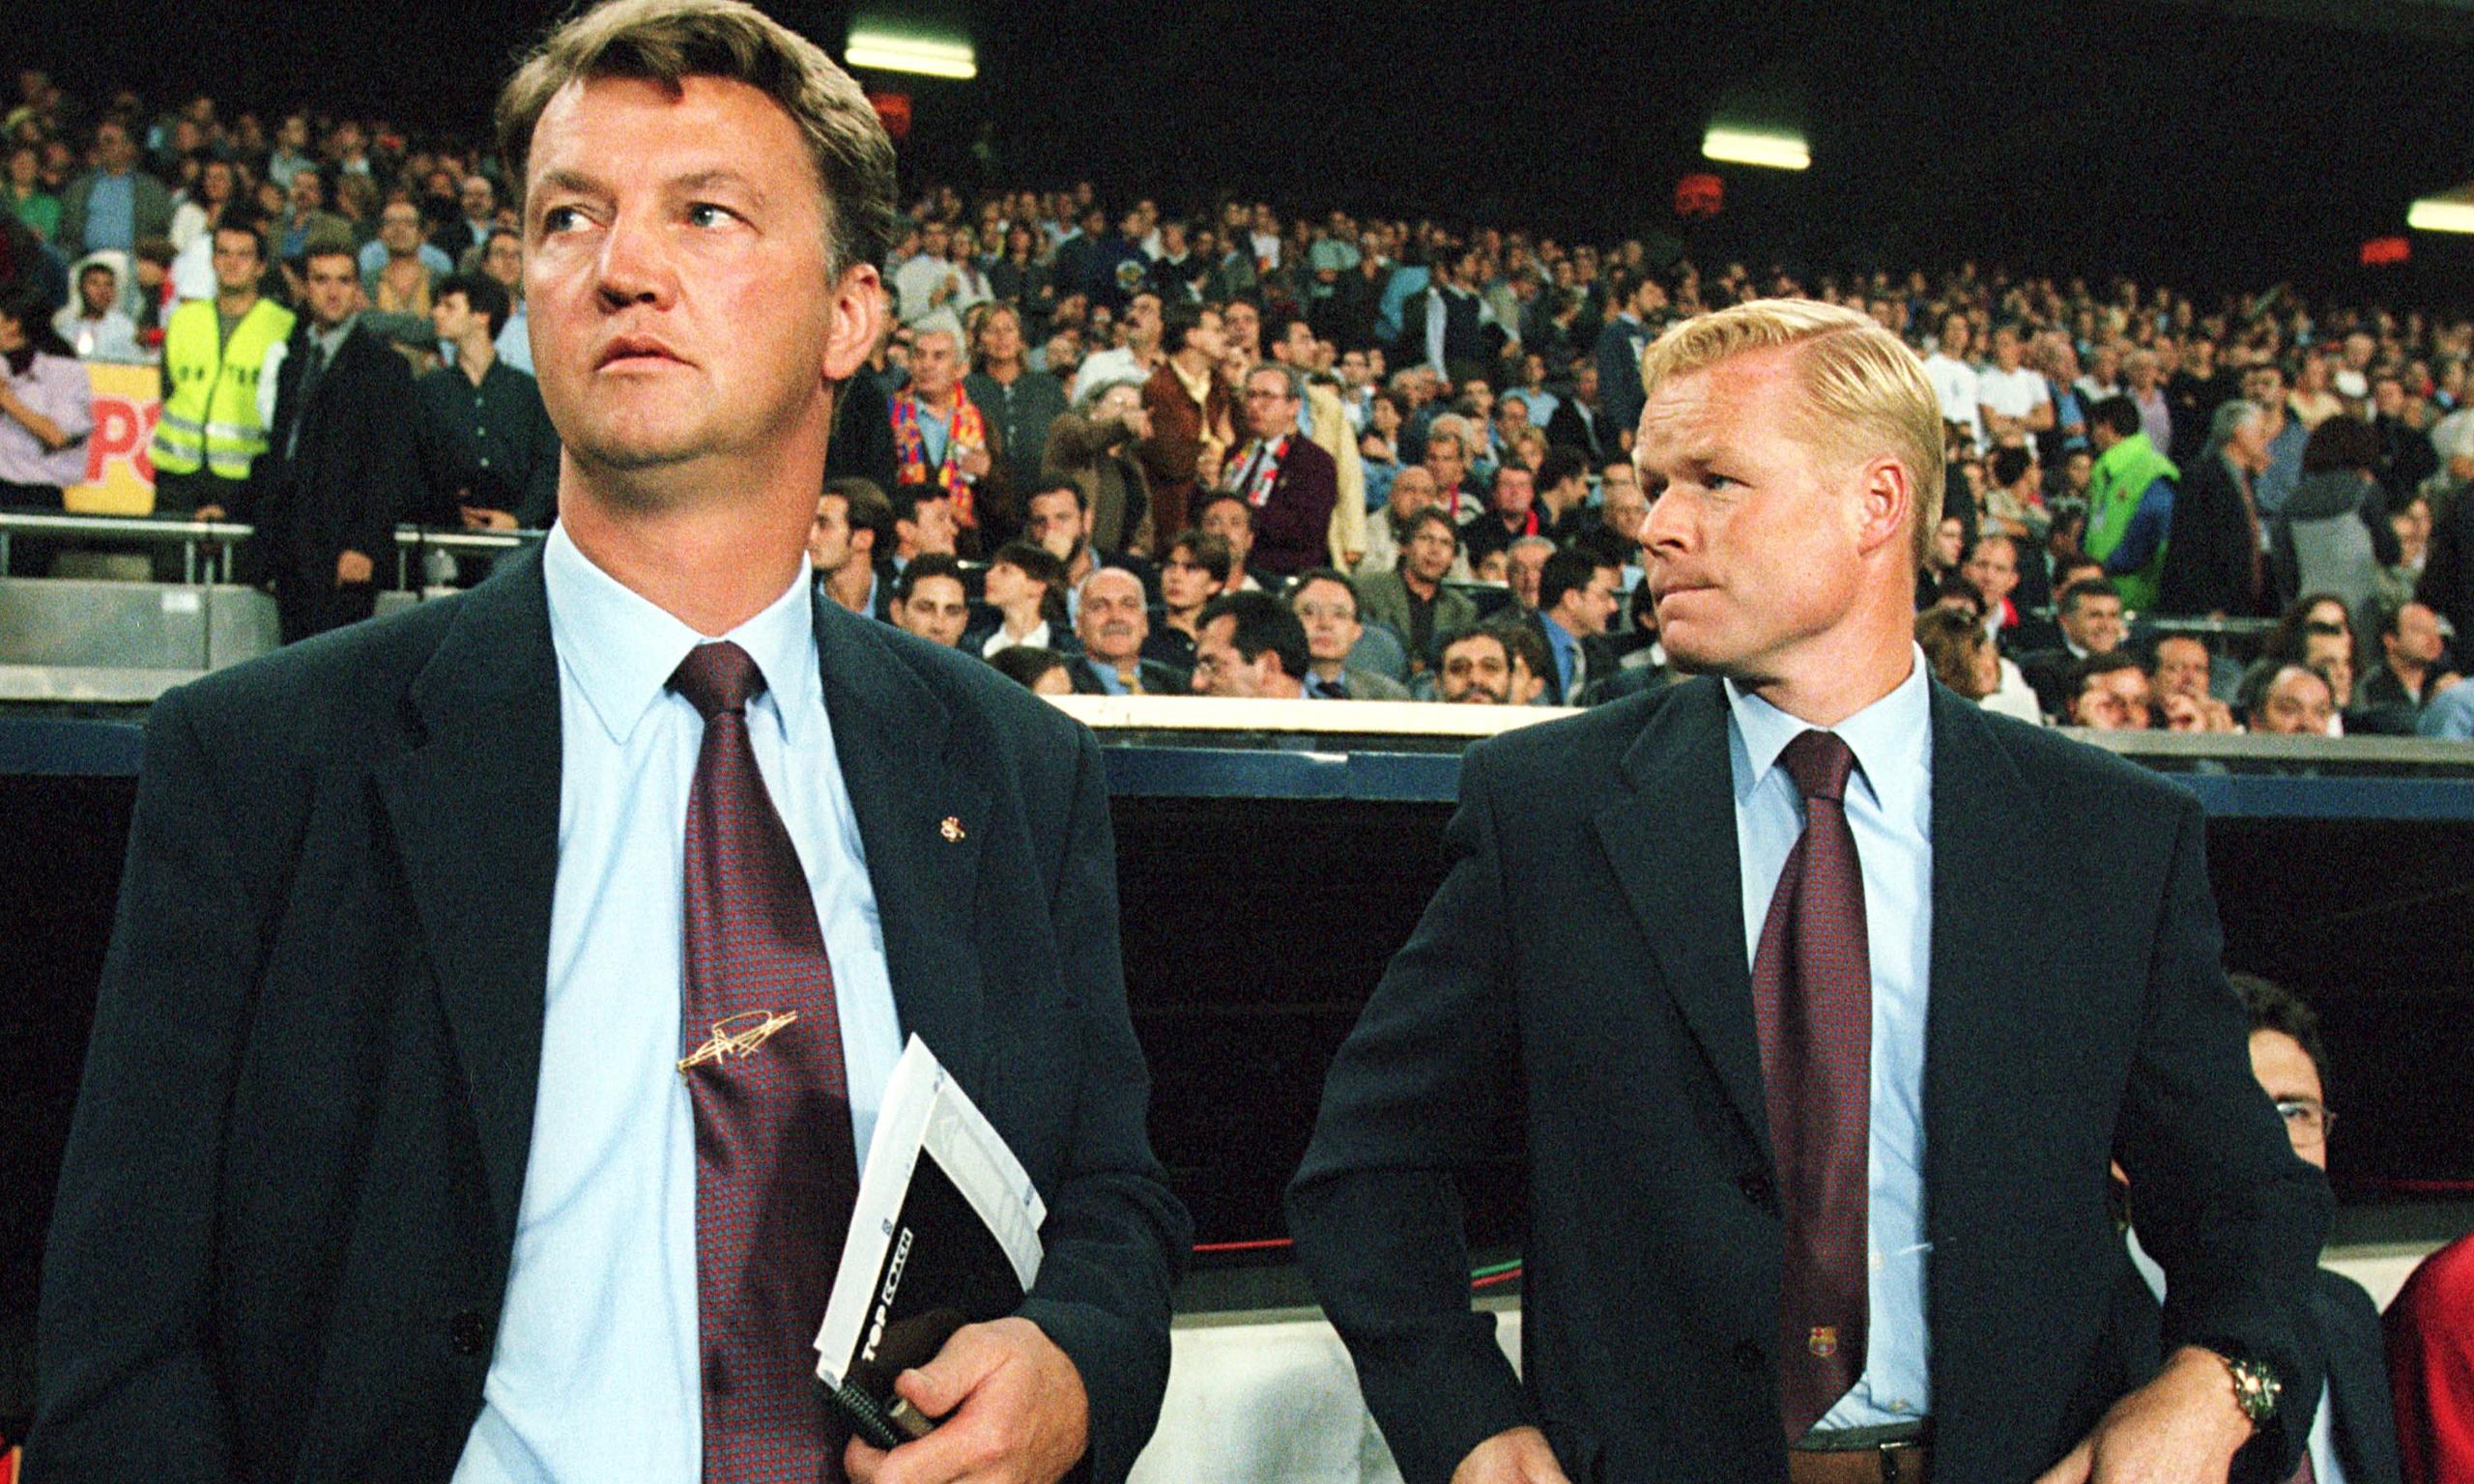 http://static.guim.co.uk/sys-images/Sport/Pix/pictures/2014/8/16/1408194840245/Louis-van-Gaal-and-Ronald-014.jpg